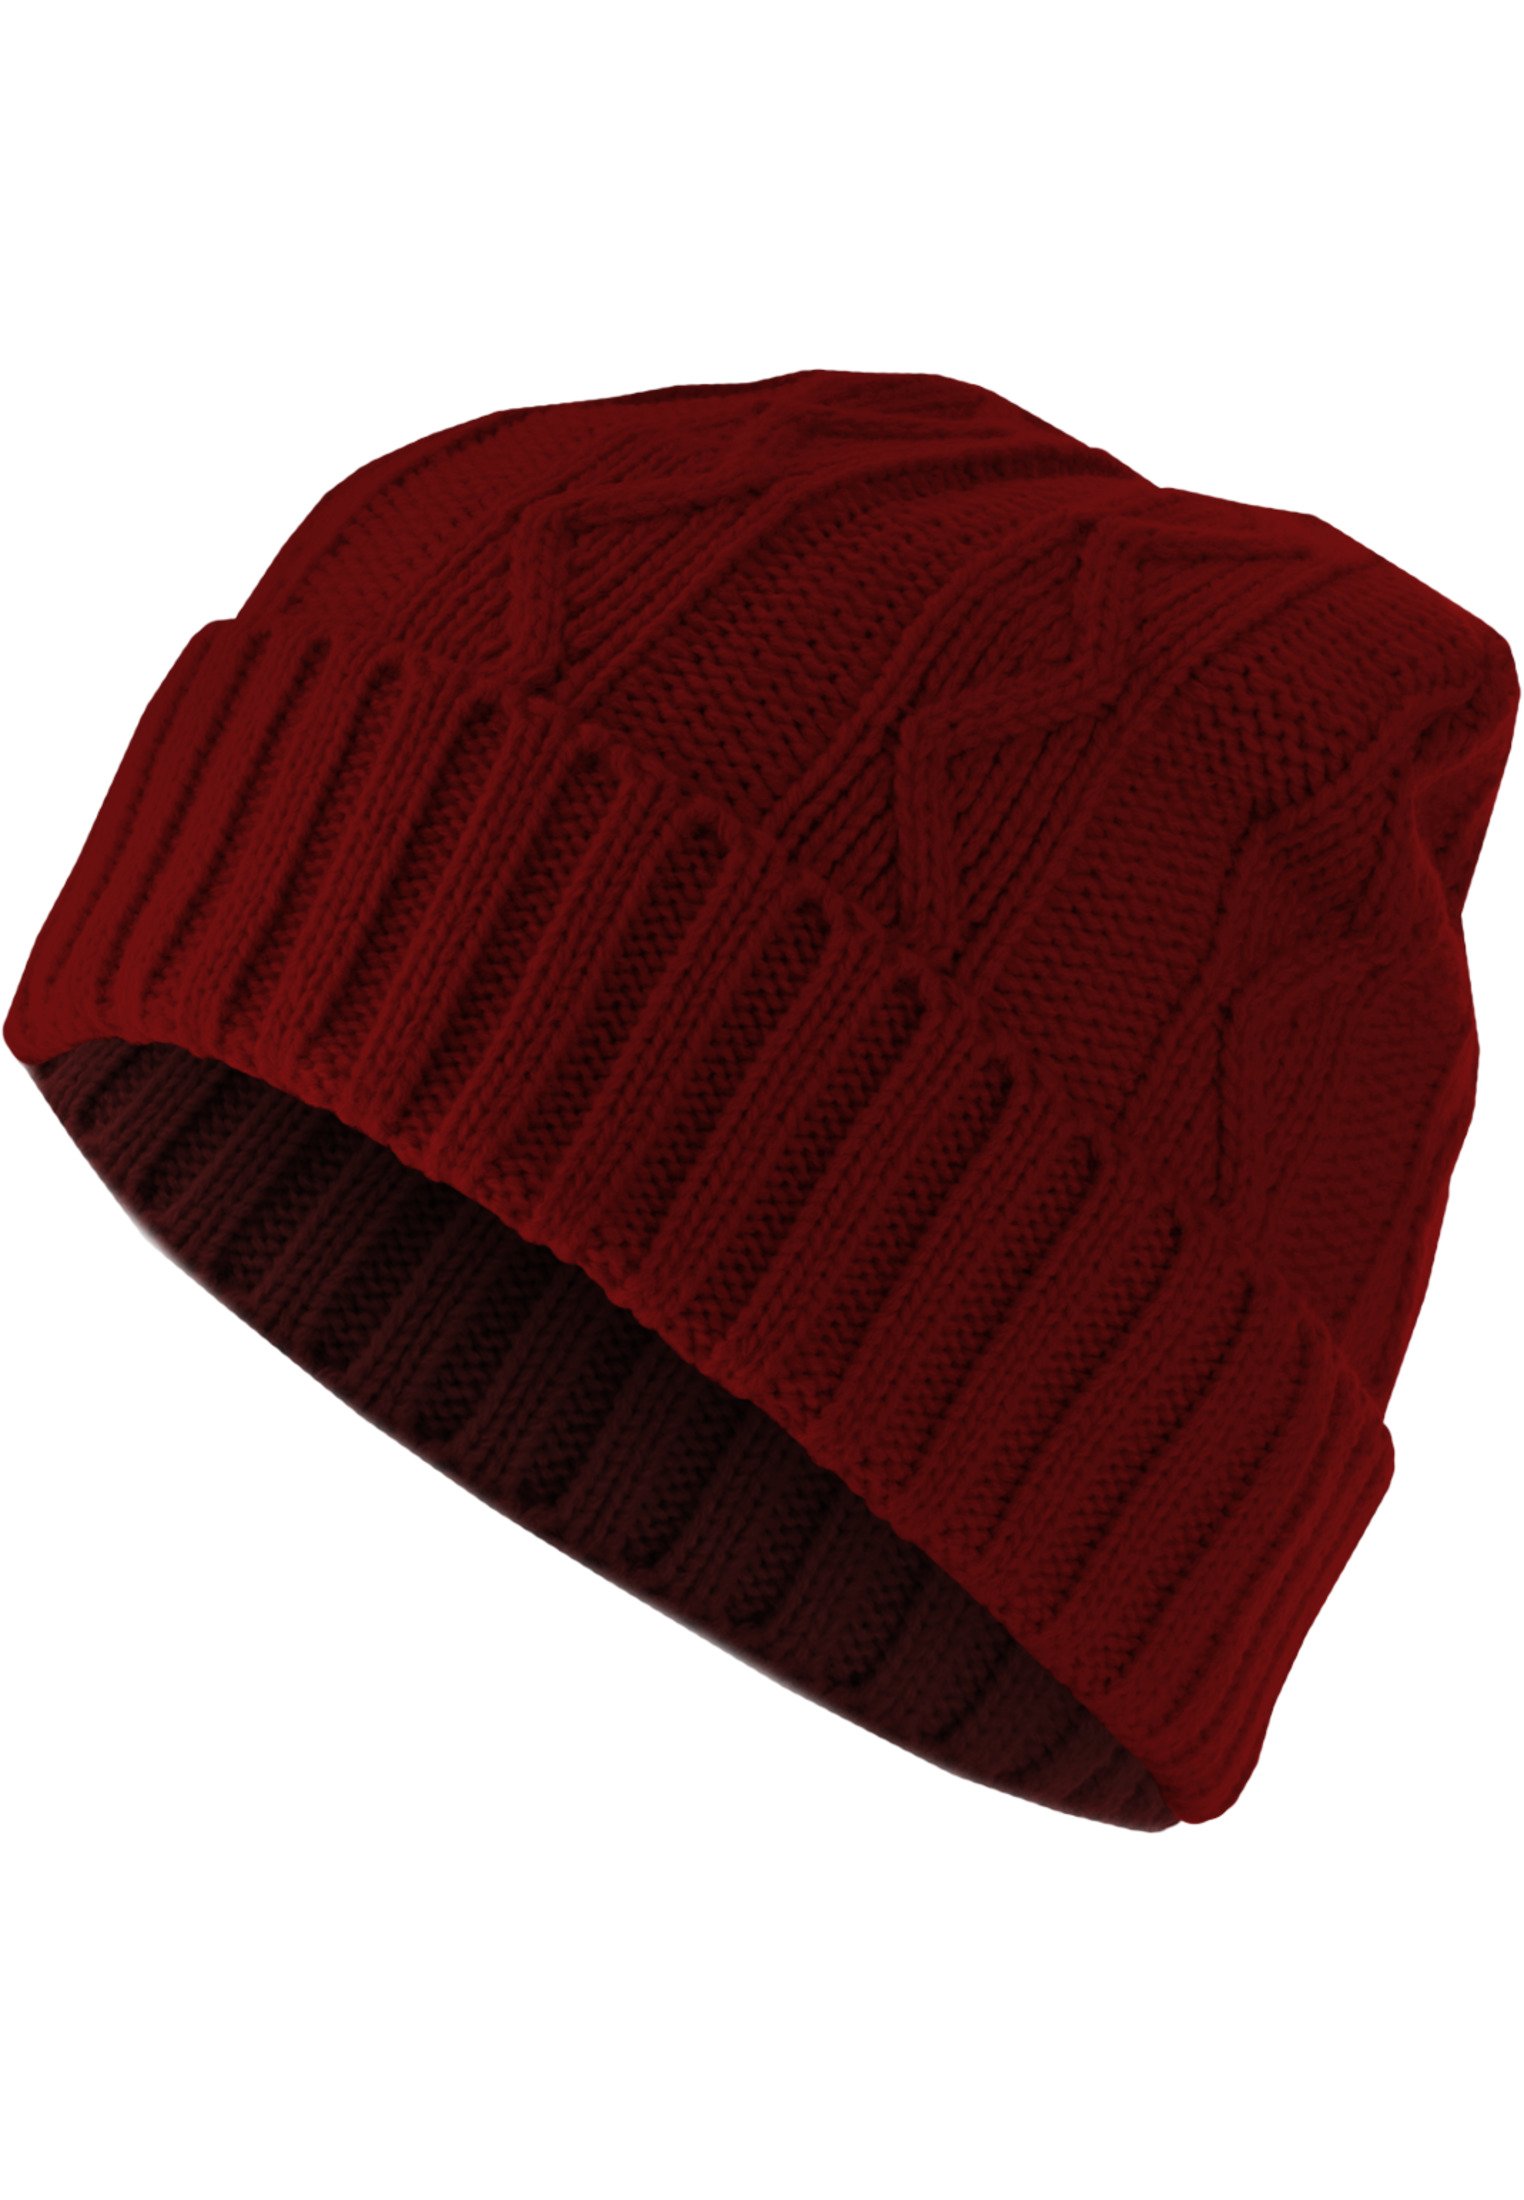 Beanie Cable Flap maroon one size